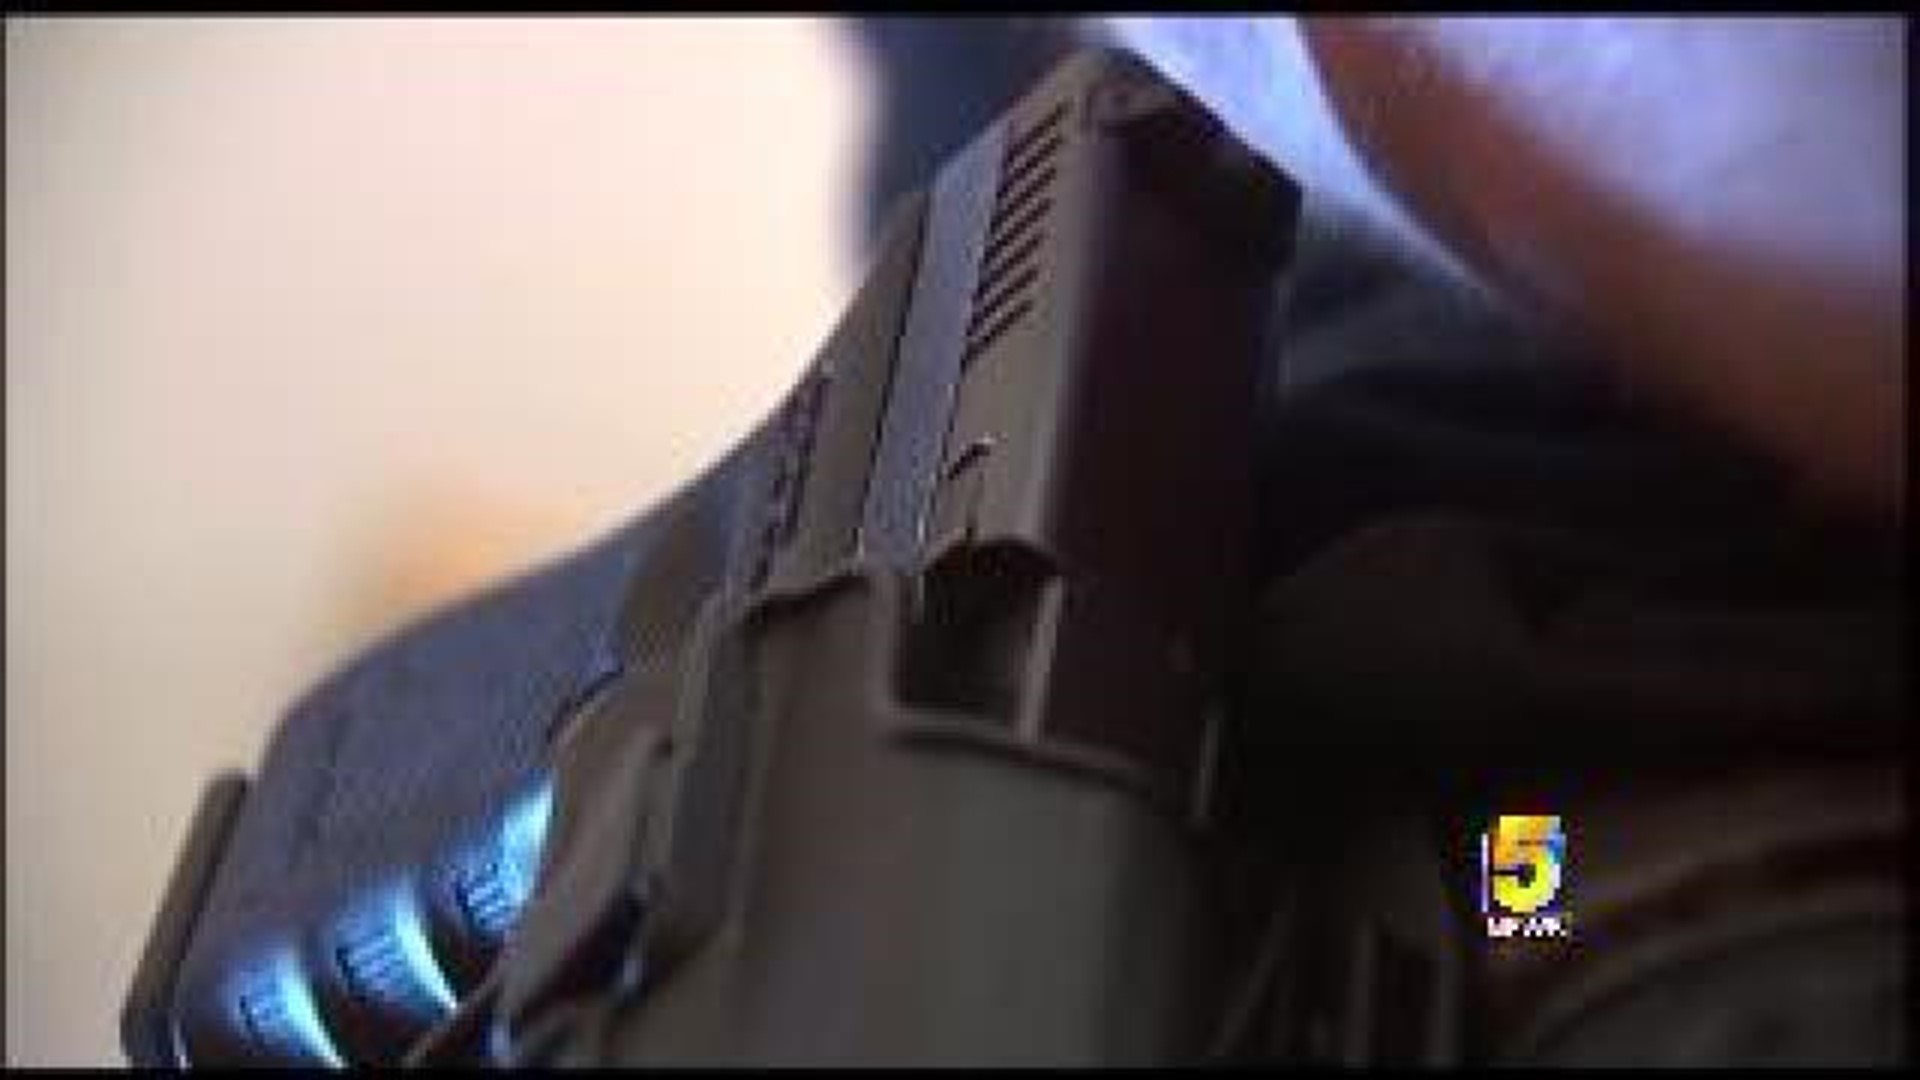 Firearm Open Carry Lawful, Top Officials Say